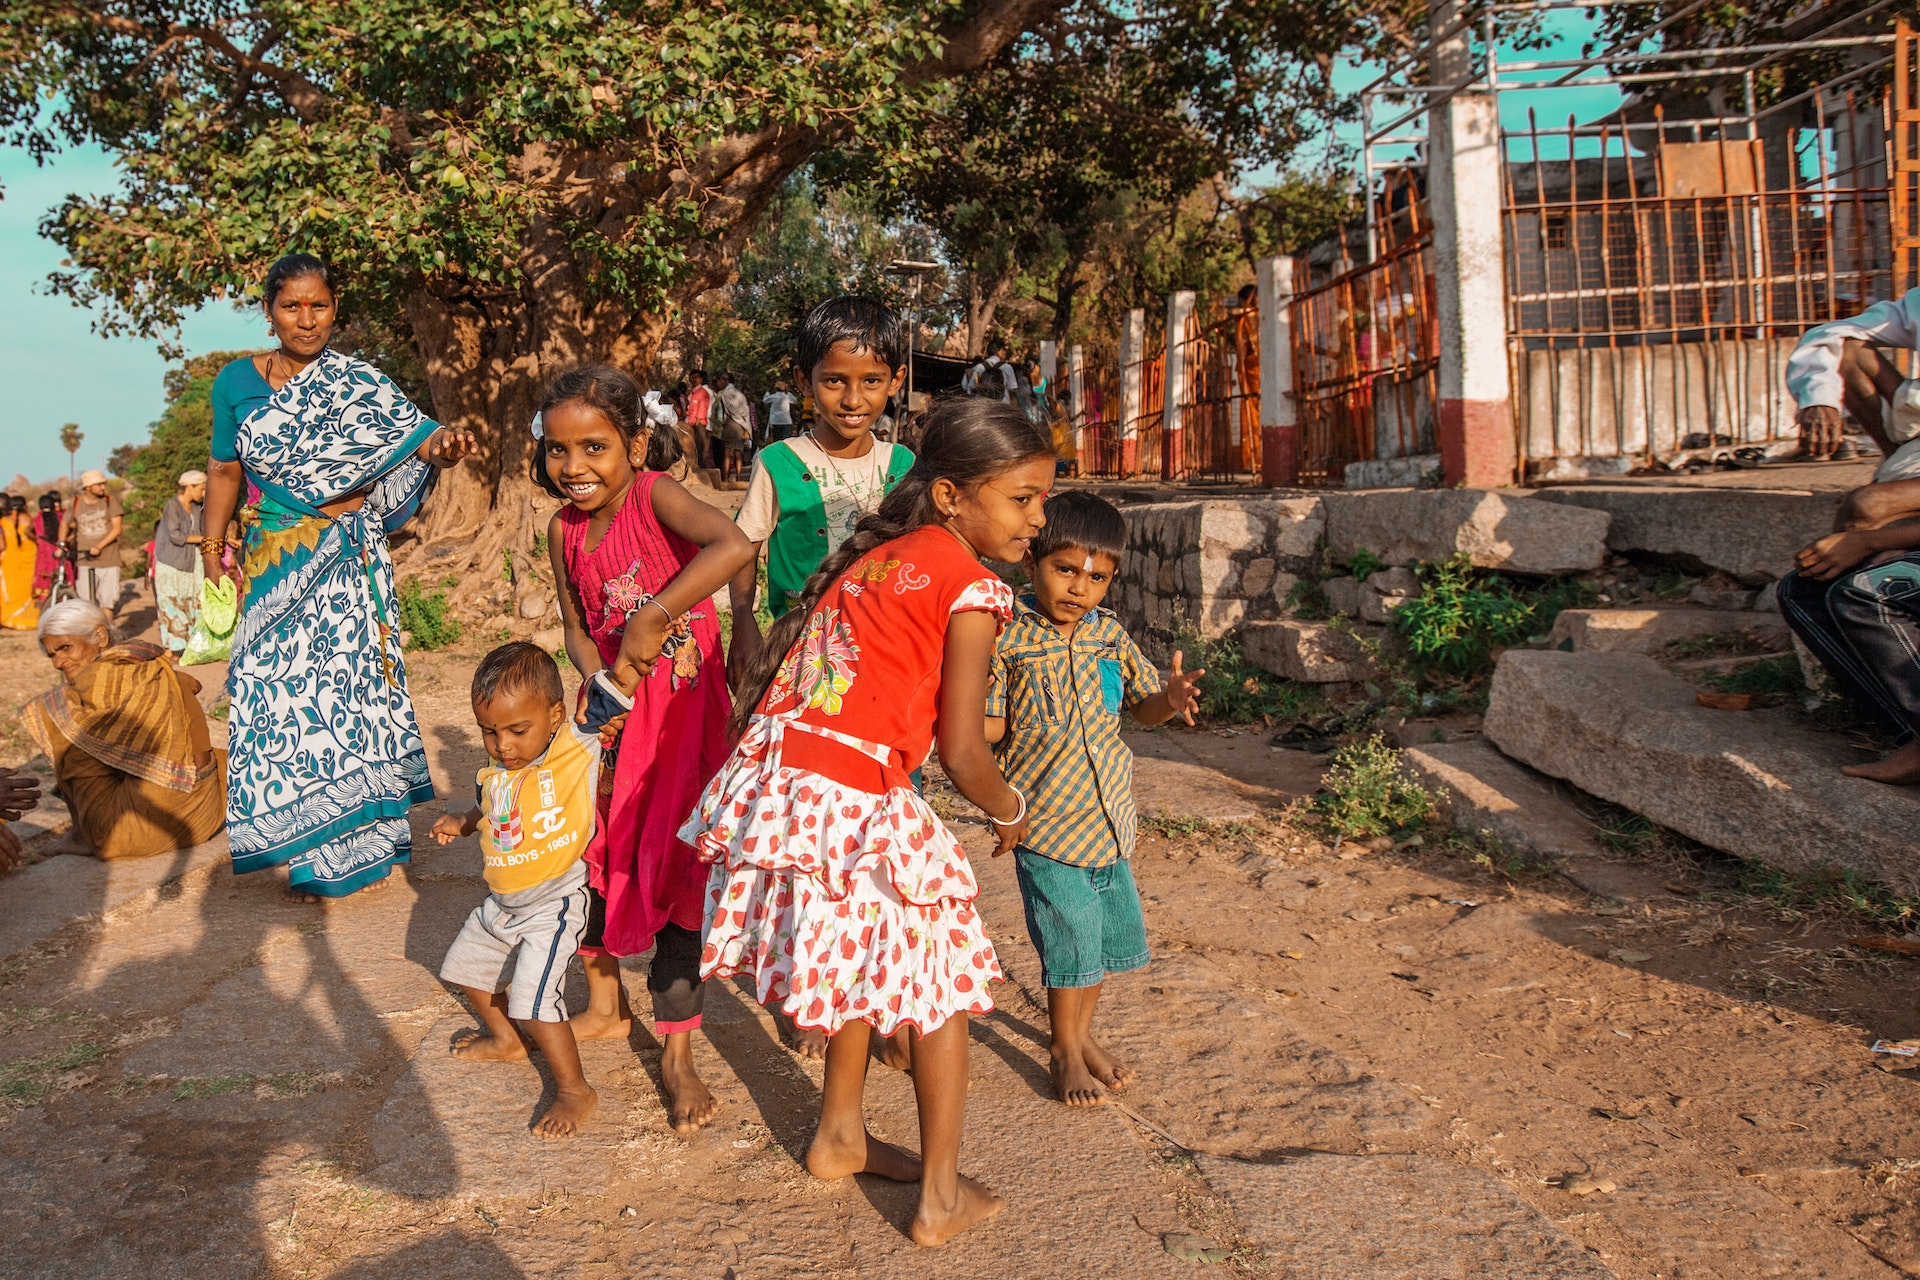 Children in India playing on the street